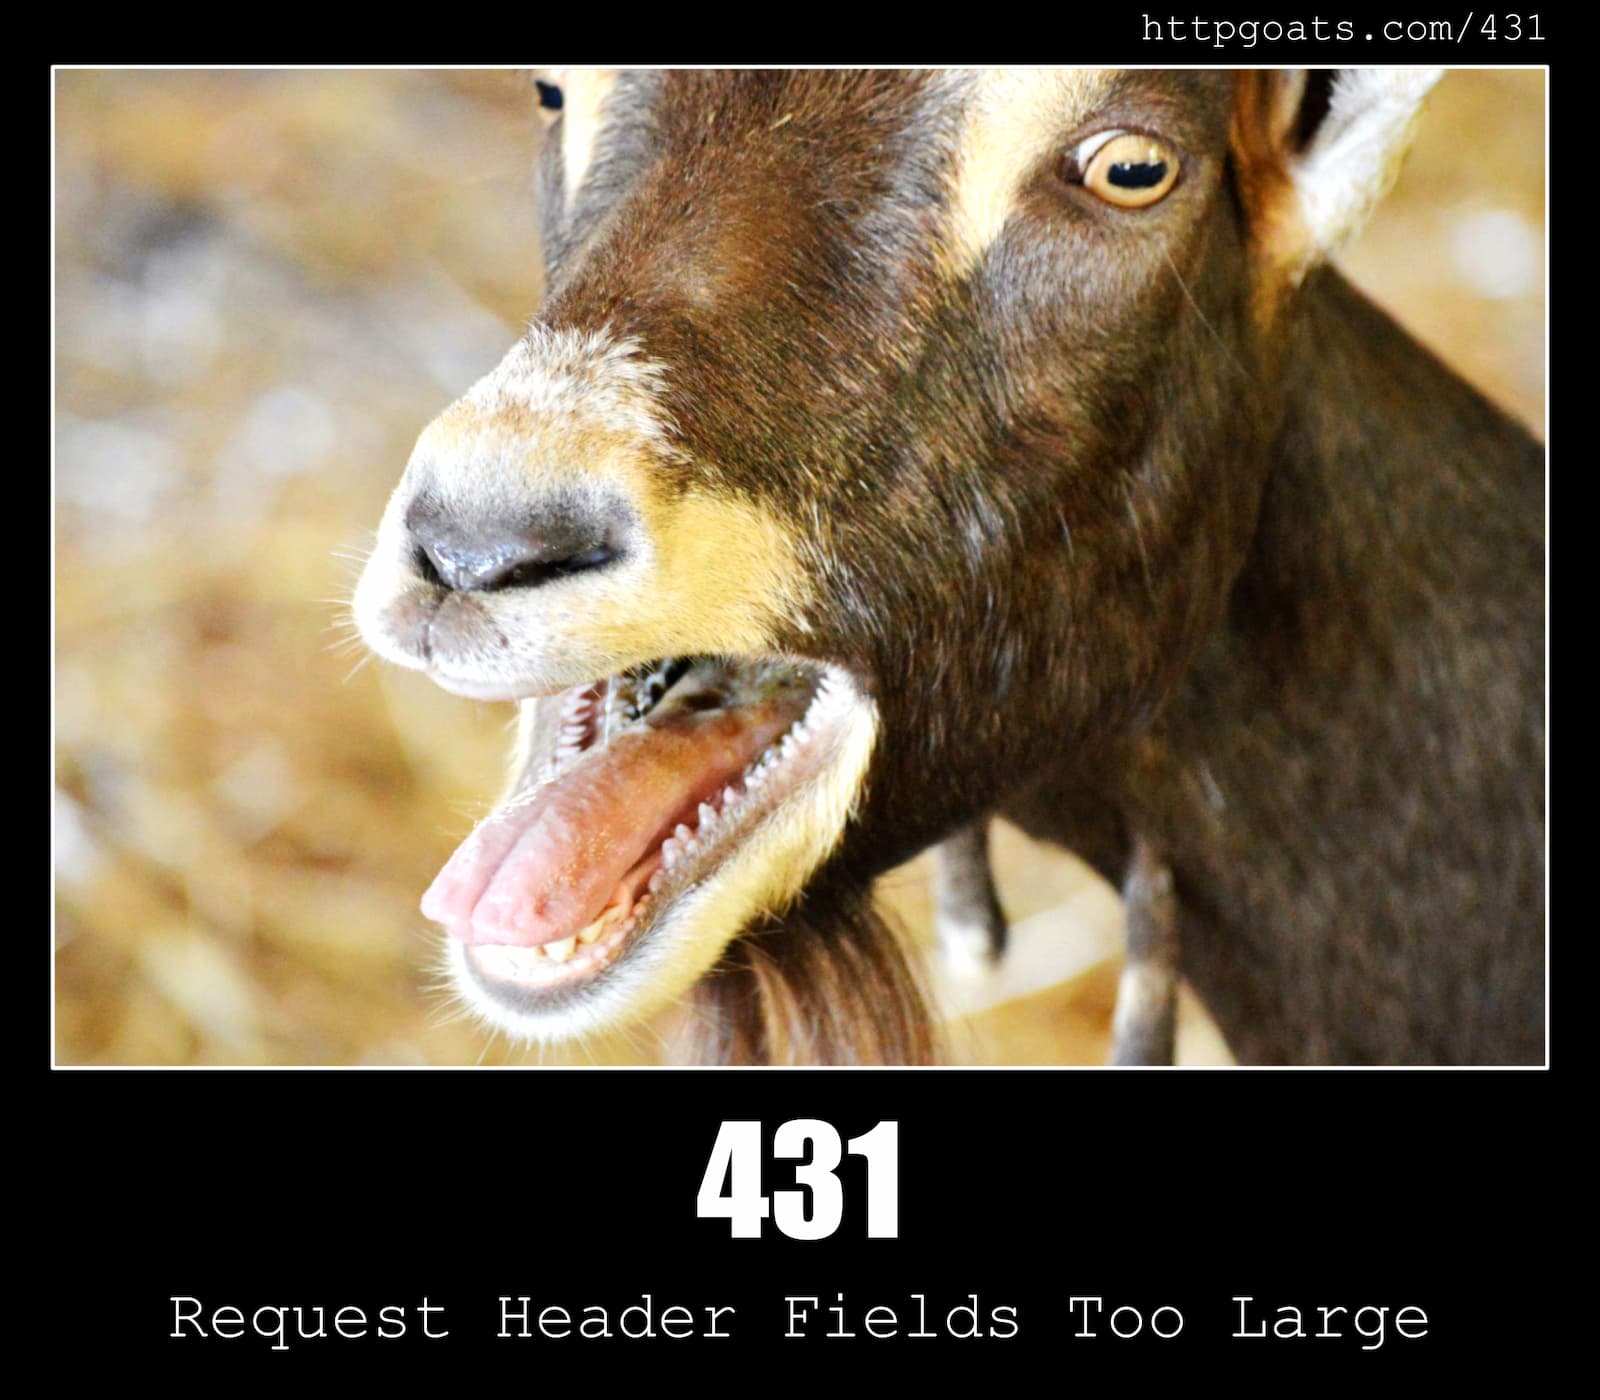 HTTP Status Code 431 Request Header Fields Too Large & Goats